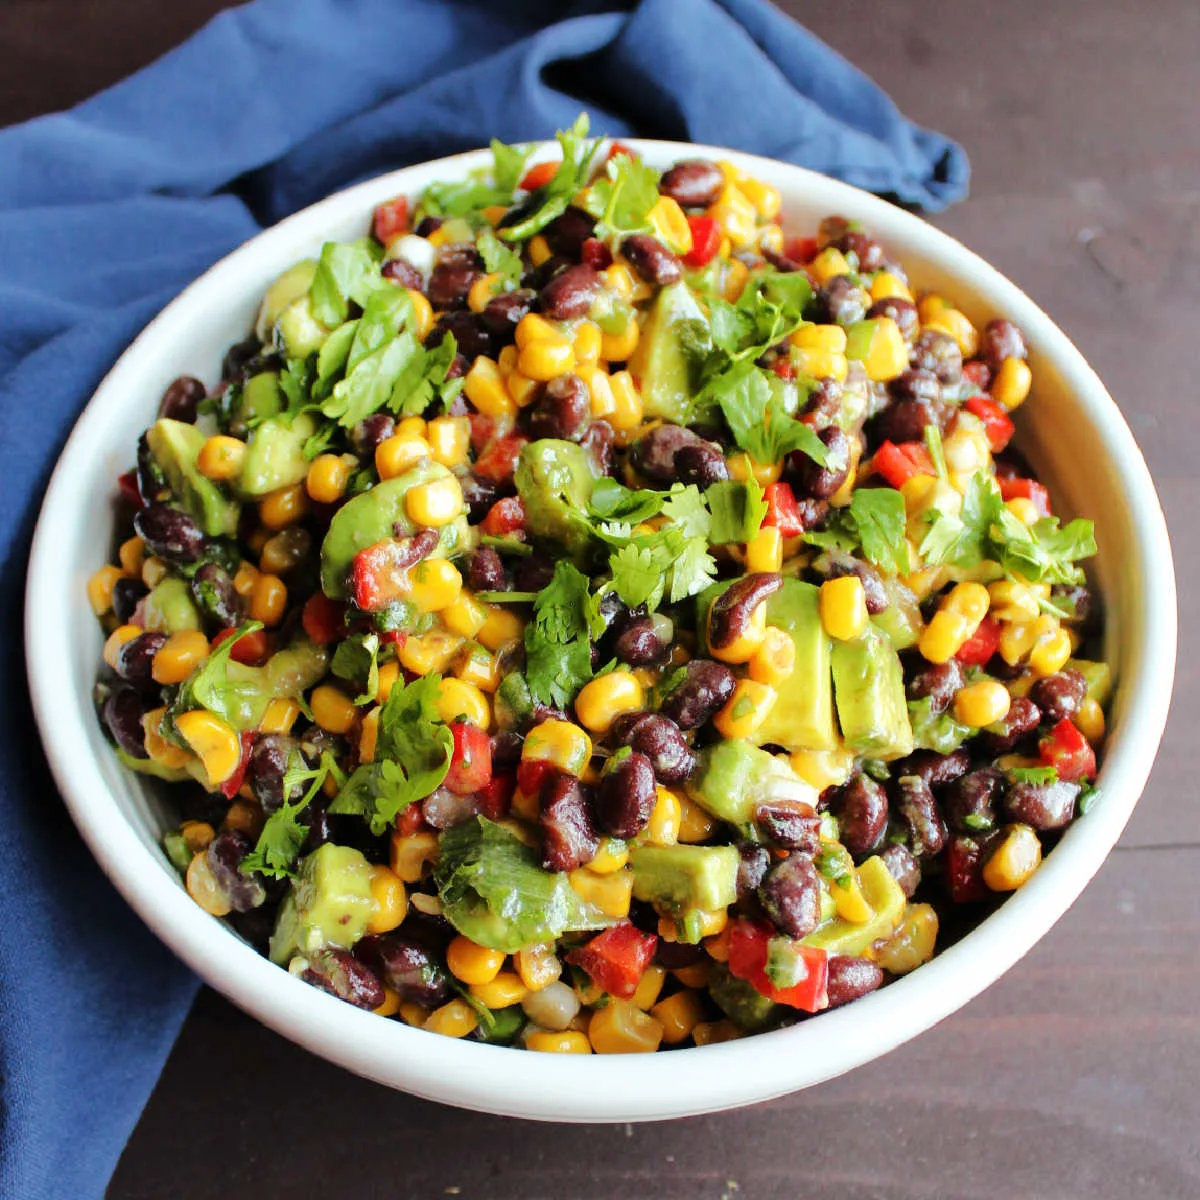 White serving bowl filled with black bean salsa with corn, red pepper, avocado and herbs.